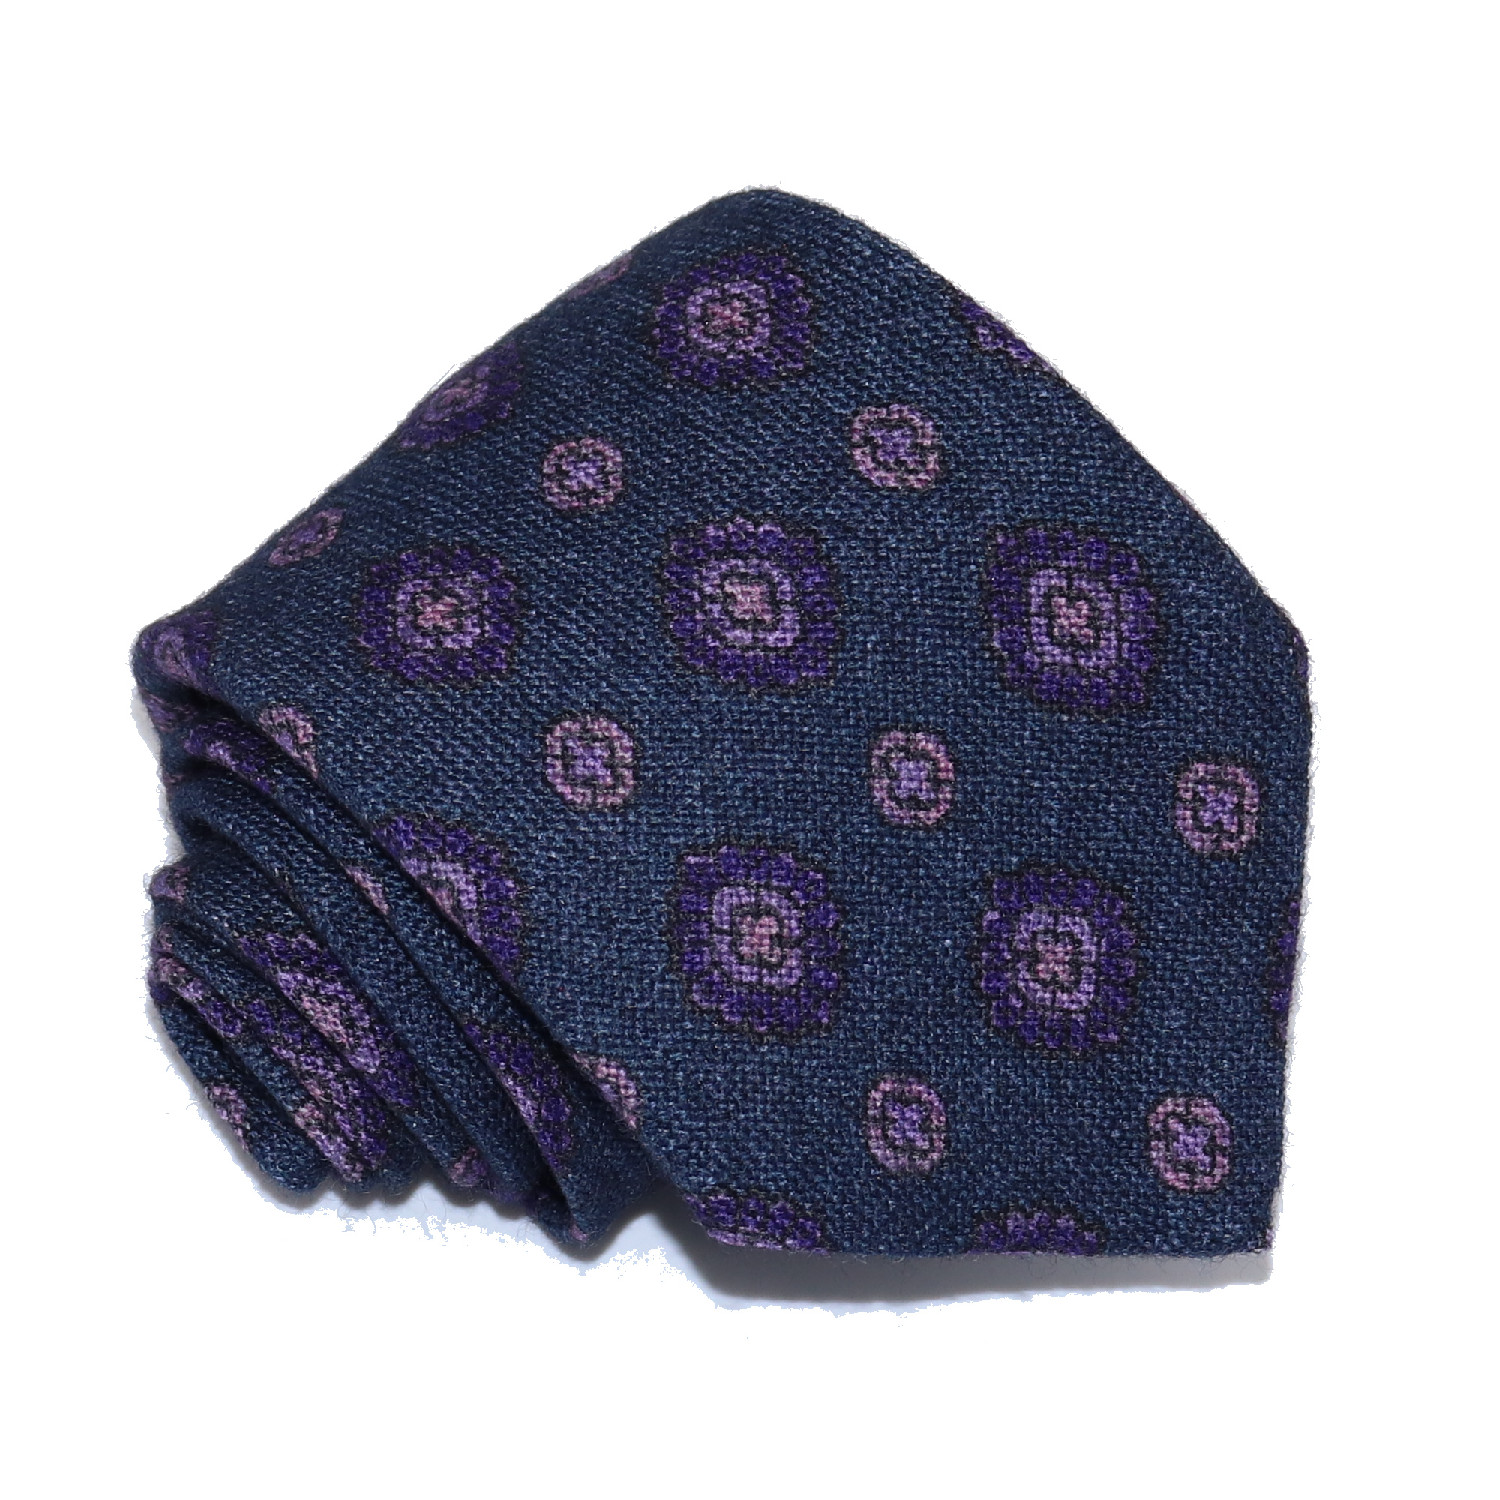 Refined 100% wool custom tie, navy blue and lilac medallions pattern ...